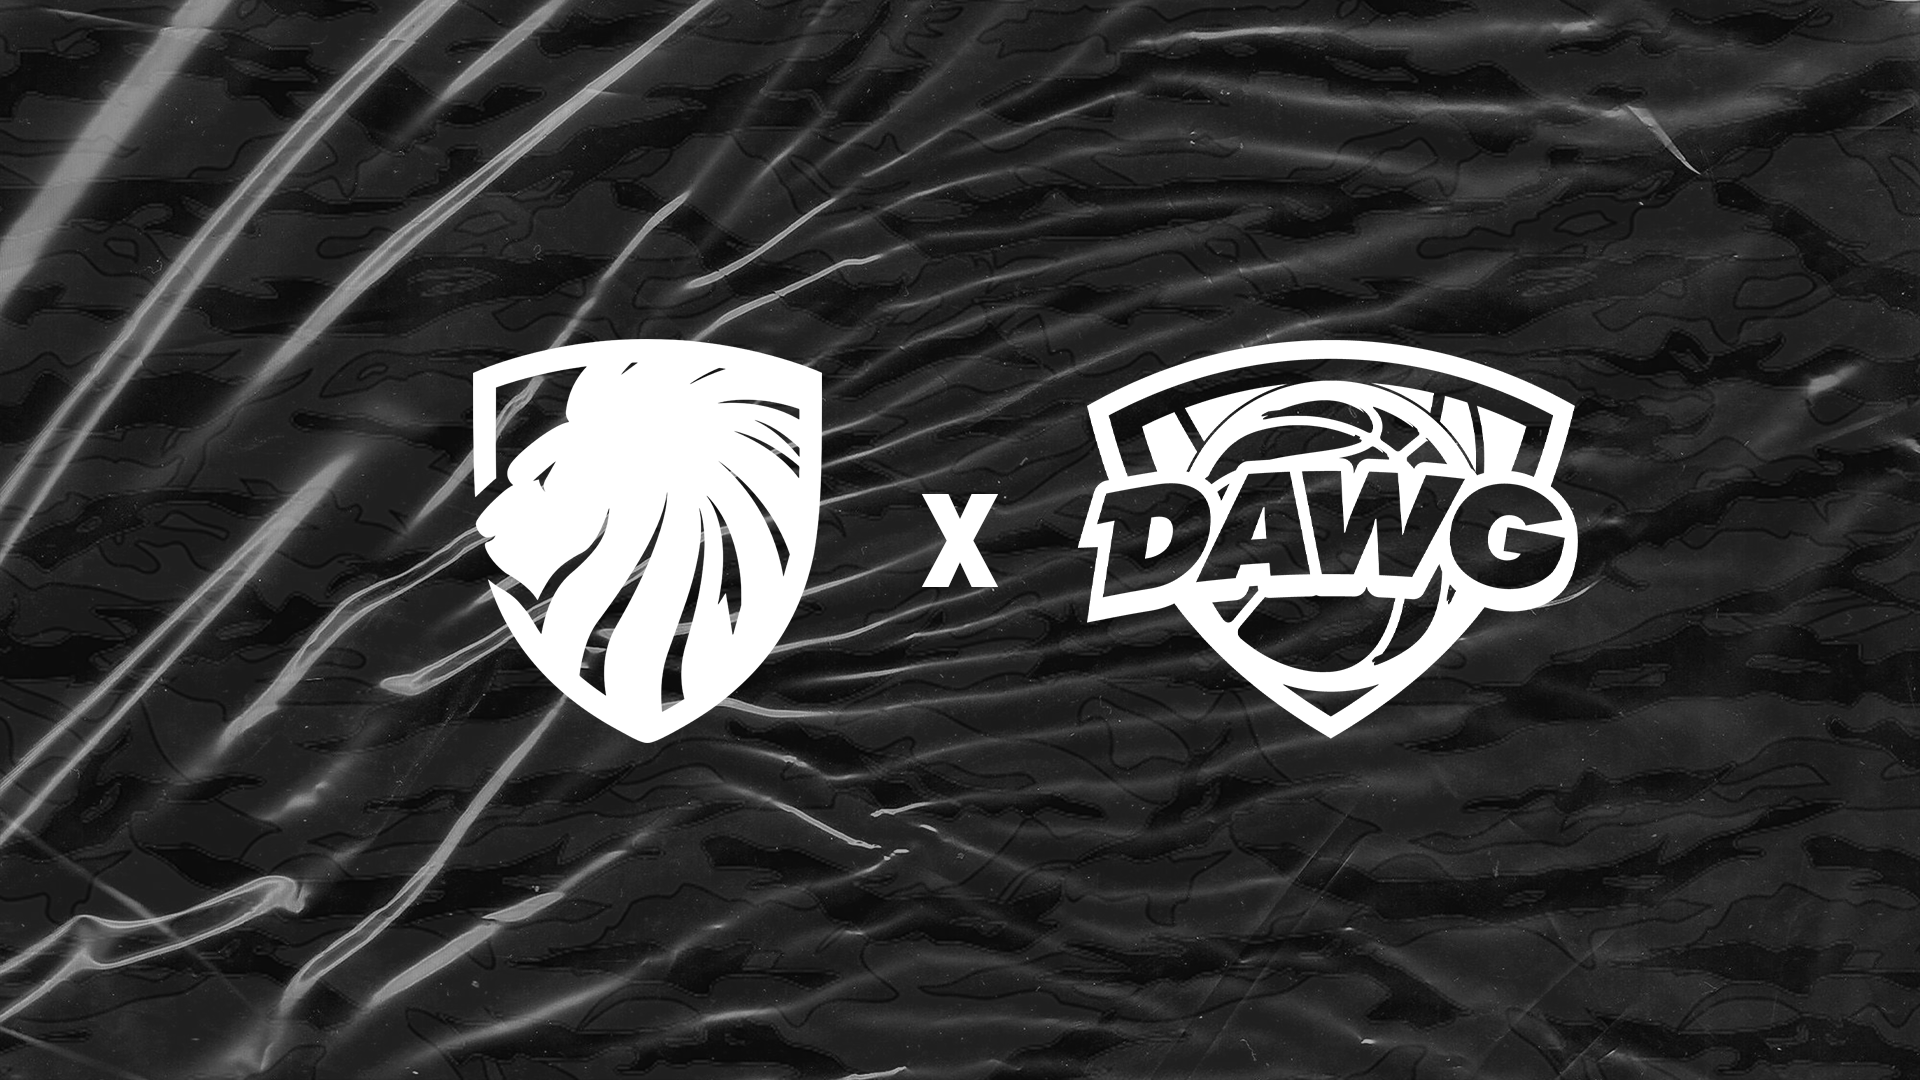 BALL DAWGS BECOMES THE OFFICIAL SPORTS MEDIA PARTNER OF VEGAS